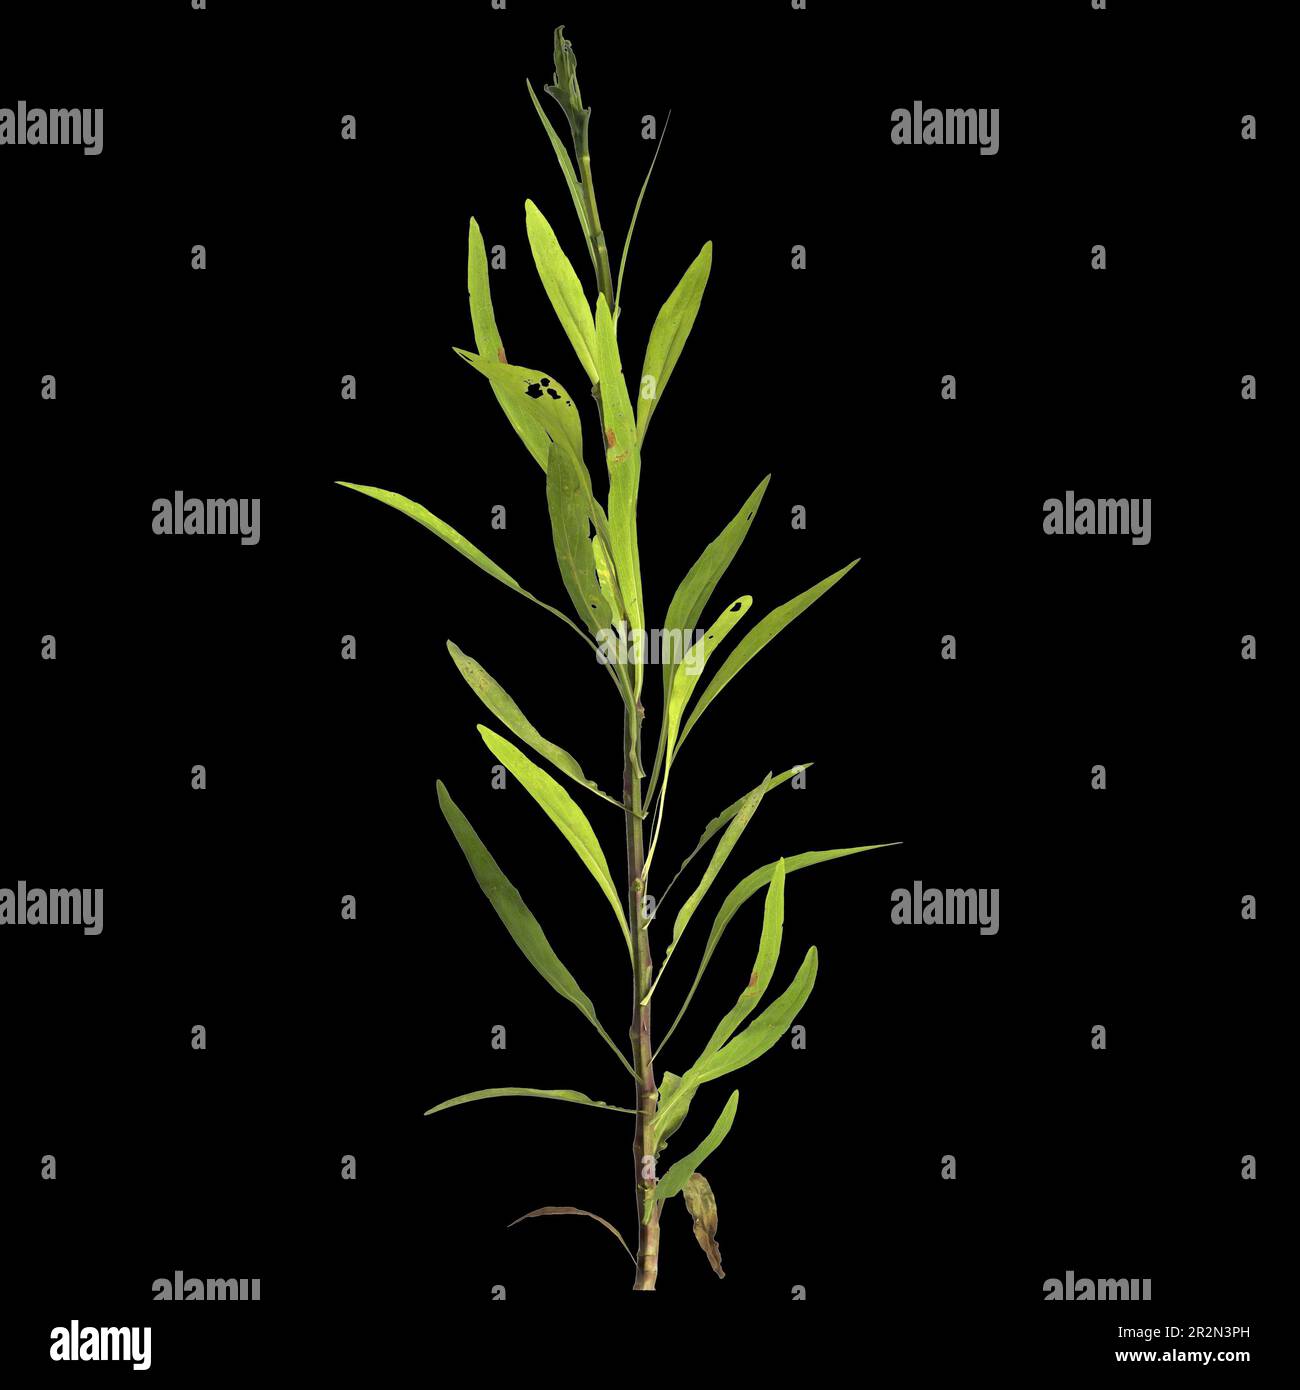 3d illustration of justicia gendarussa plant isolated on black background Stock Photo